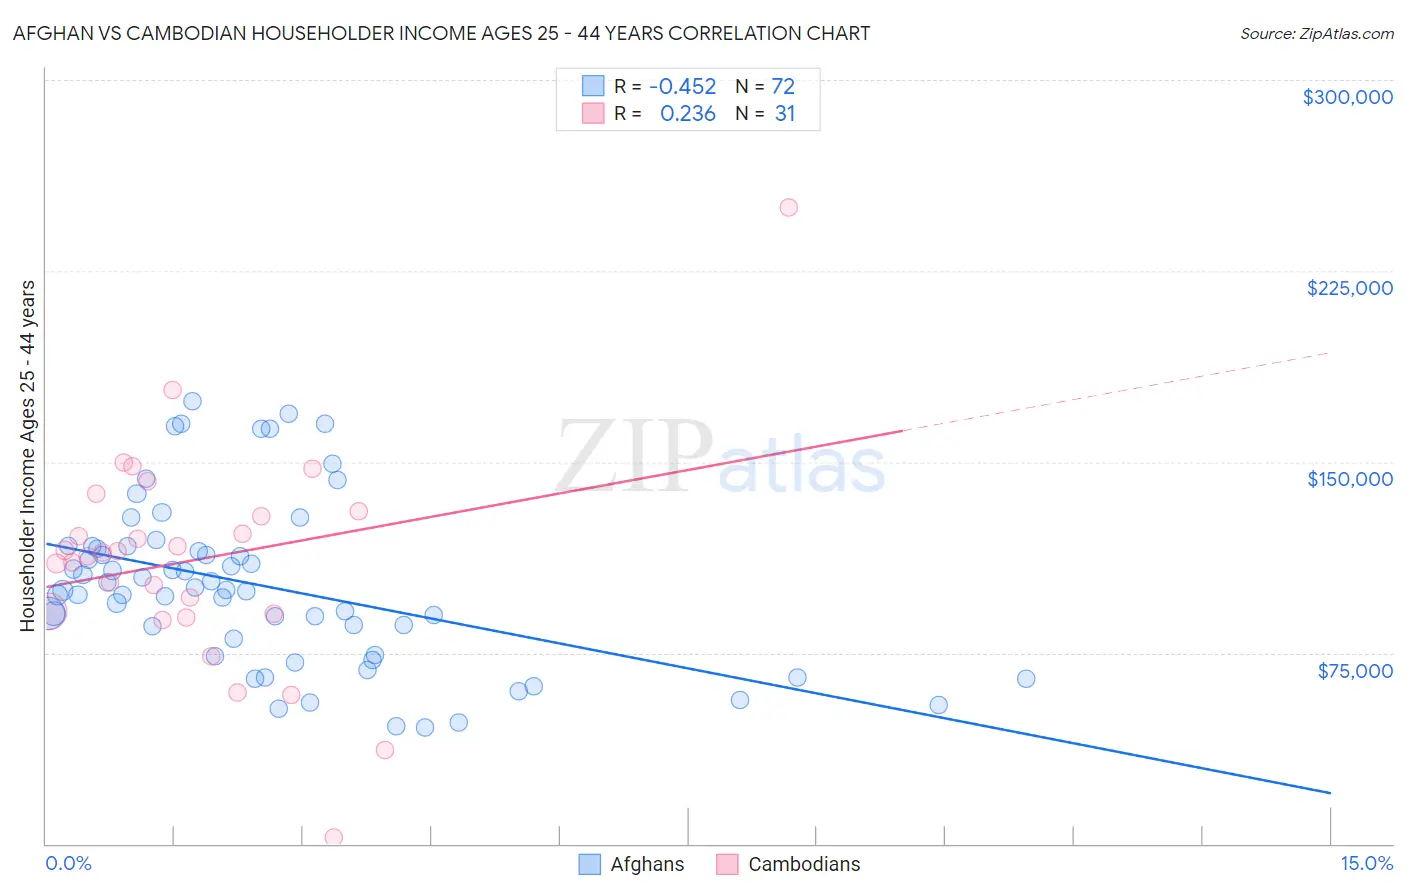 Afghan vs Cambodian Householder Income Ages 25 - 44 years